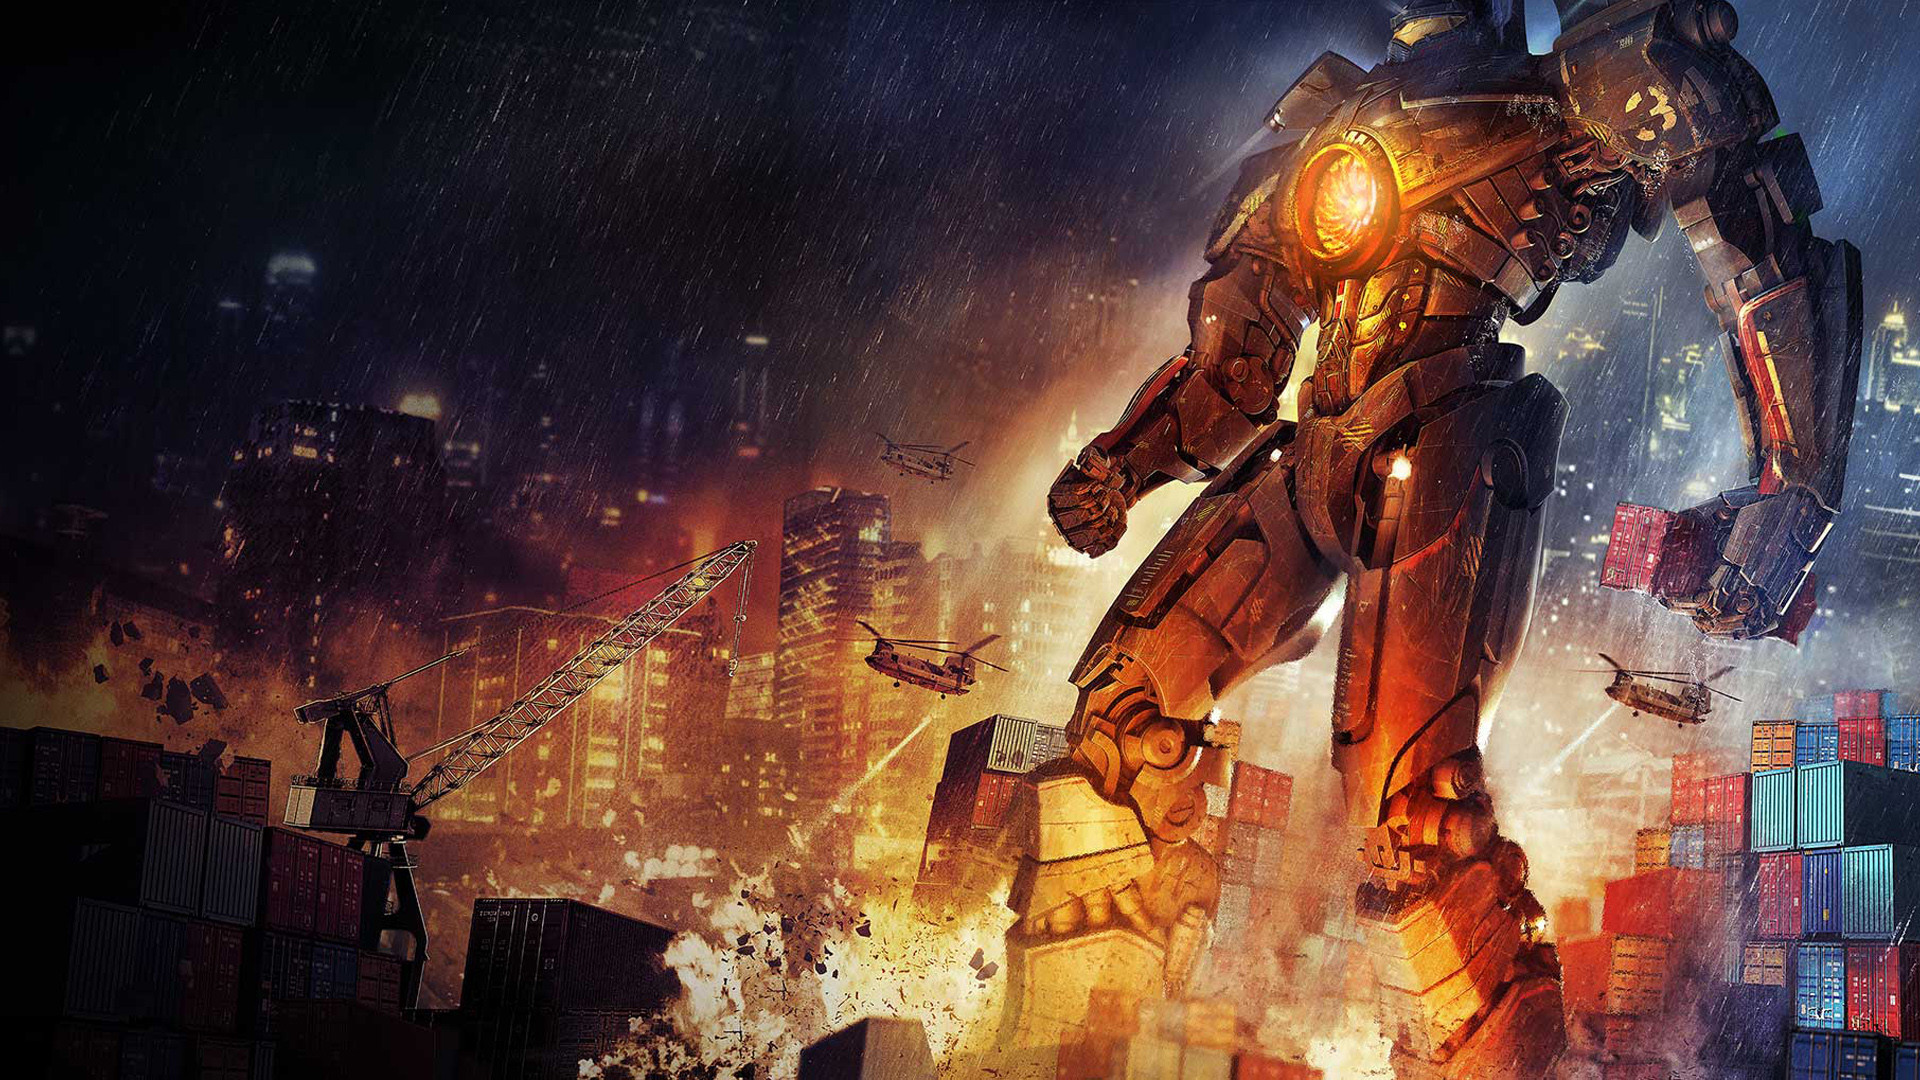 Pacific Rim Gypsy Danger Exclusive HD Wallpapers #3246